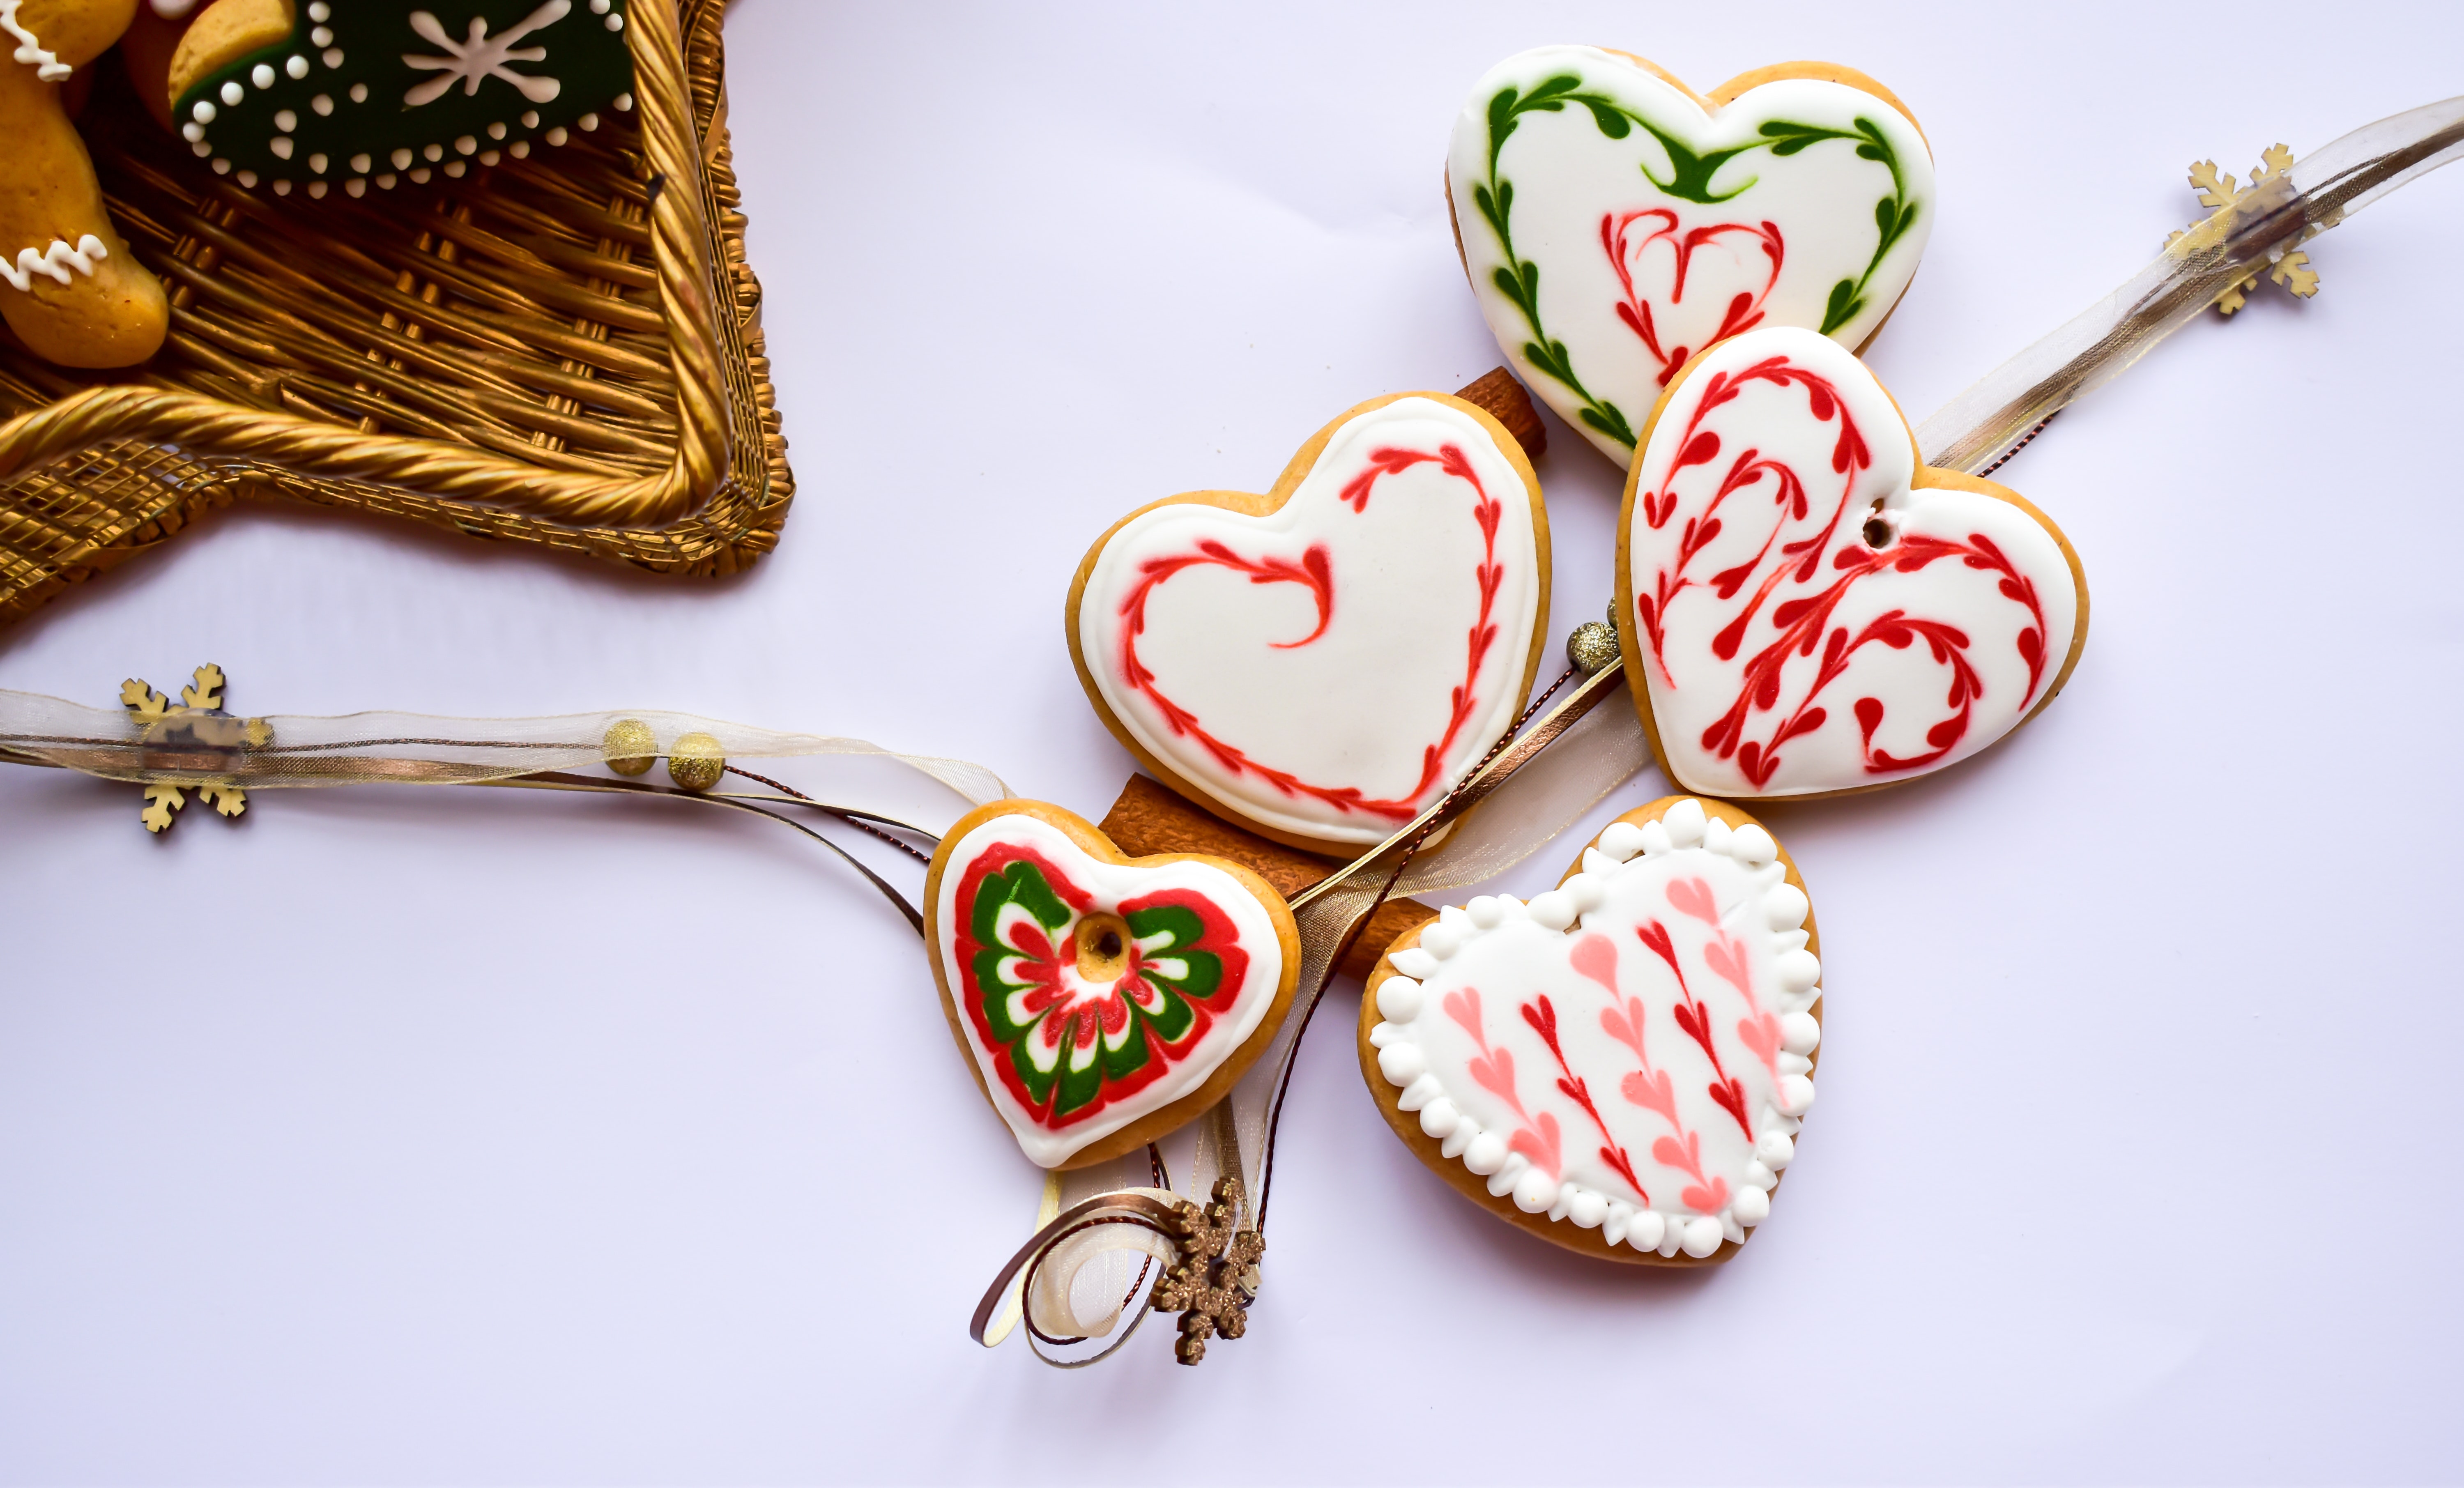 A gift pack filled with Christmas cookies makes a beautiful DIY present!